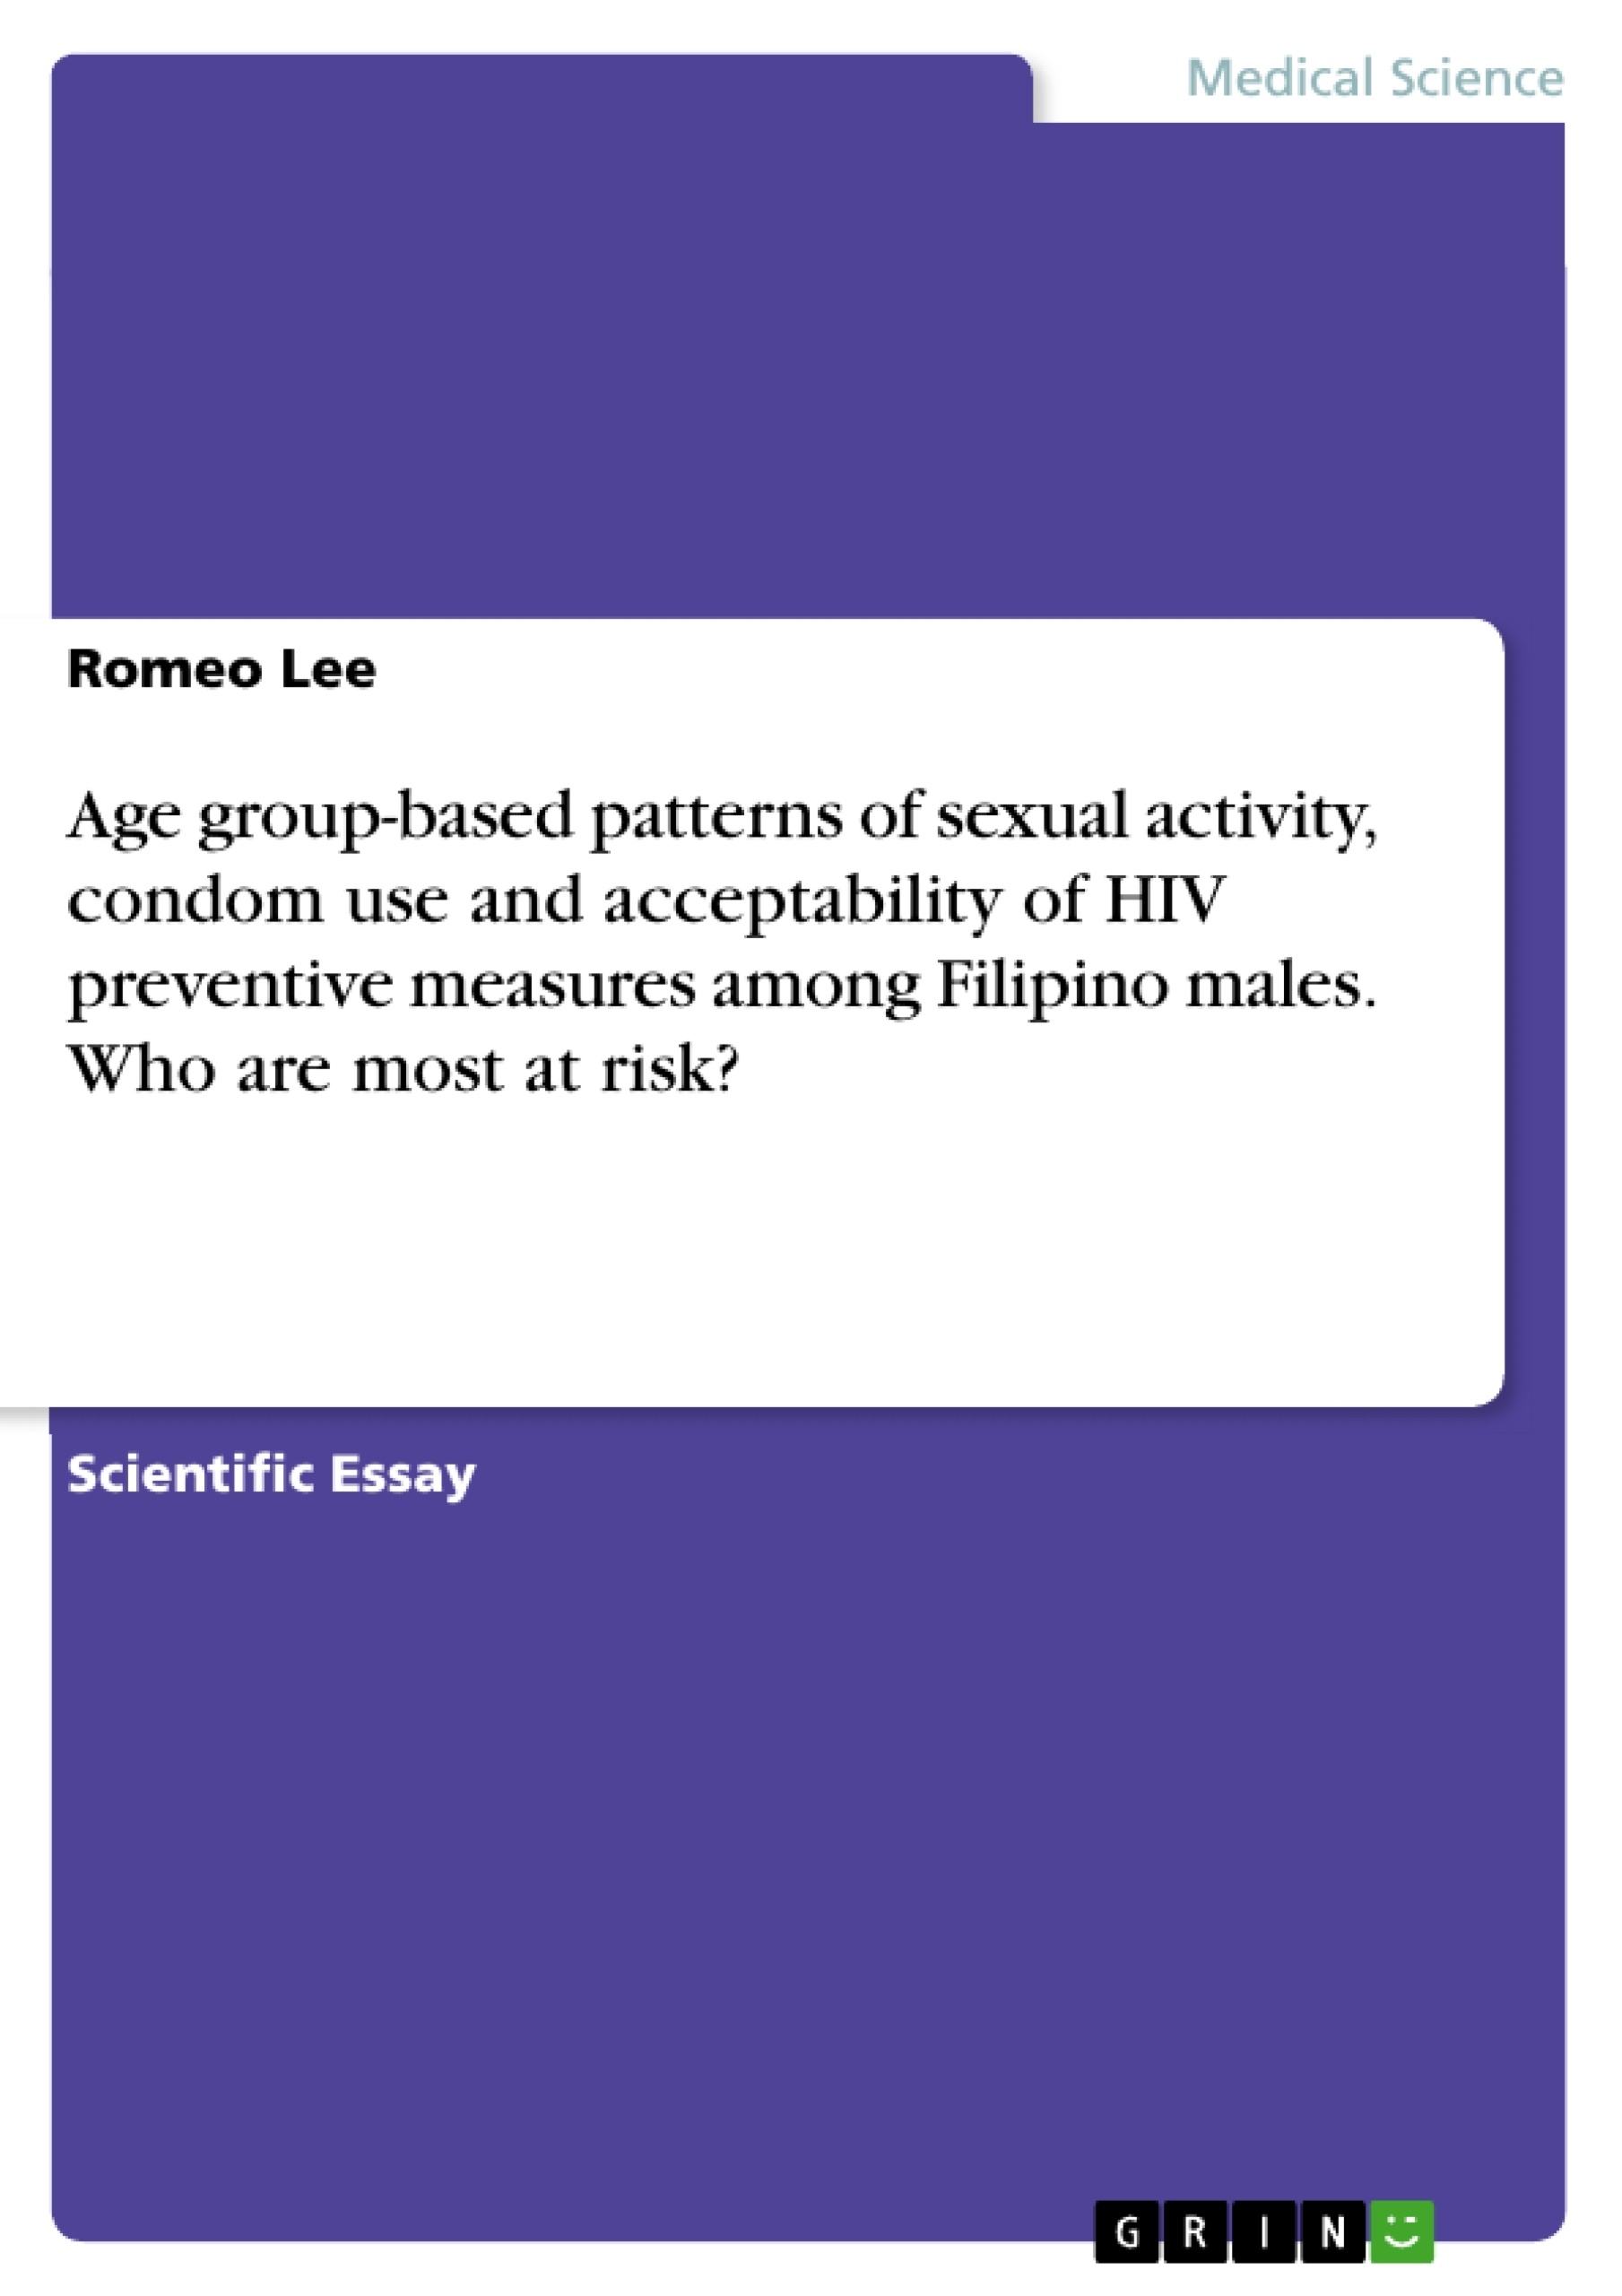 Titel: Age group-based patterns of sexual activity, condom use and acceptability of HIV preventive measures among Filipino males. Who are most at risk?